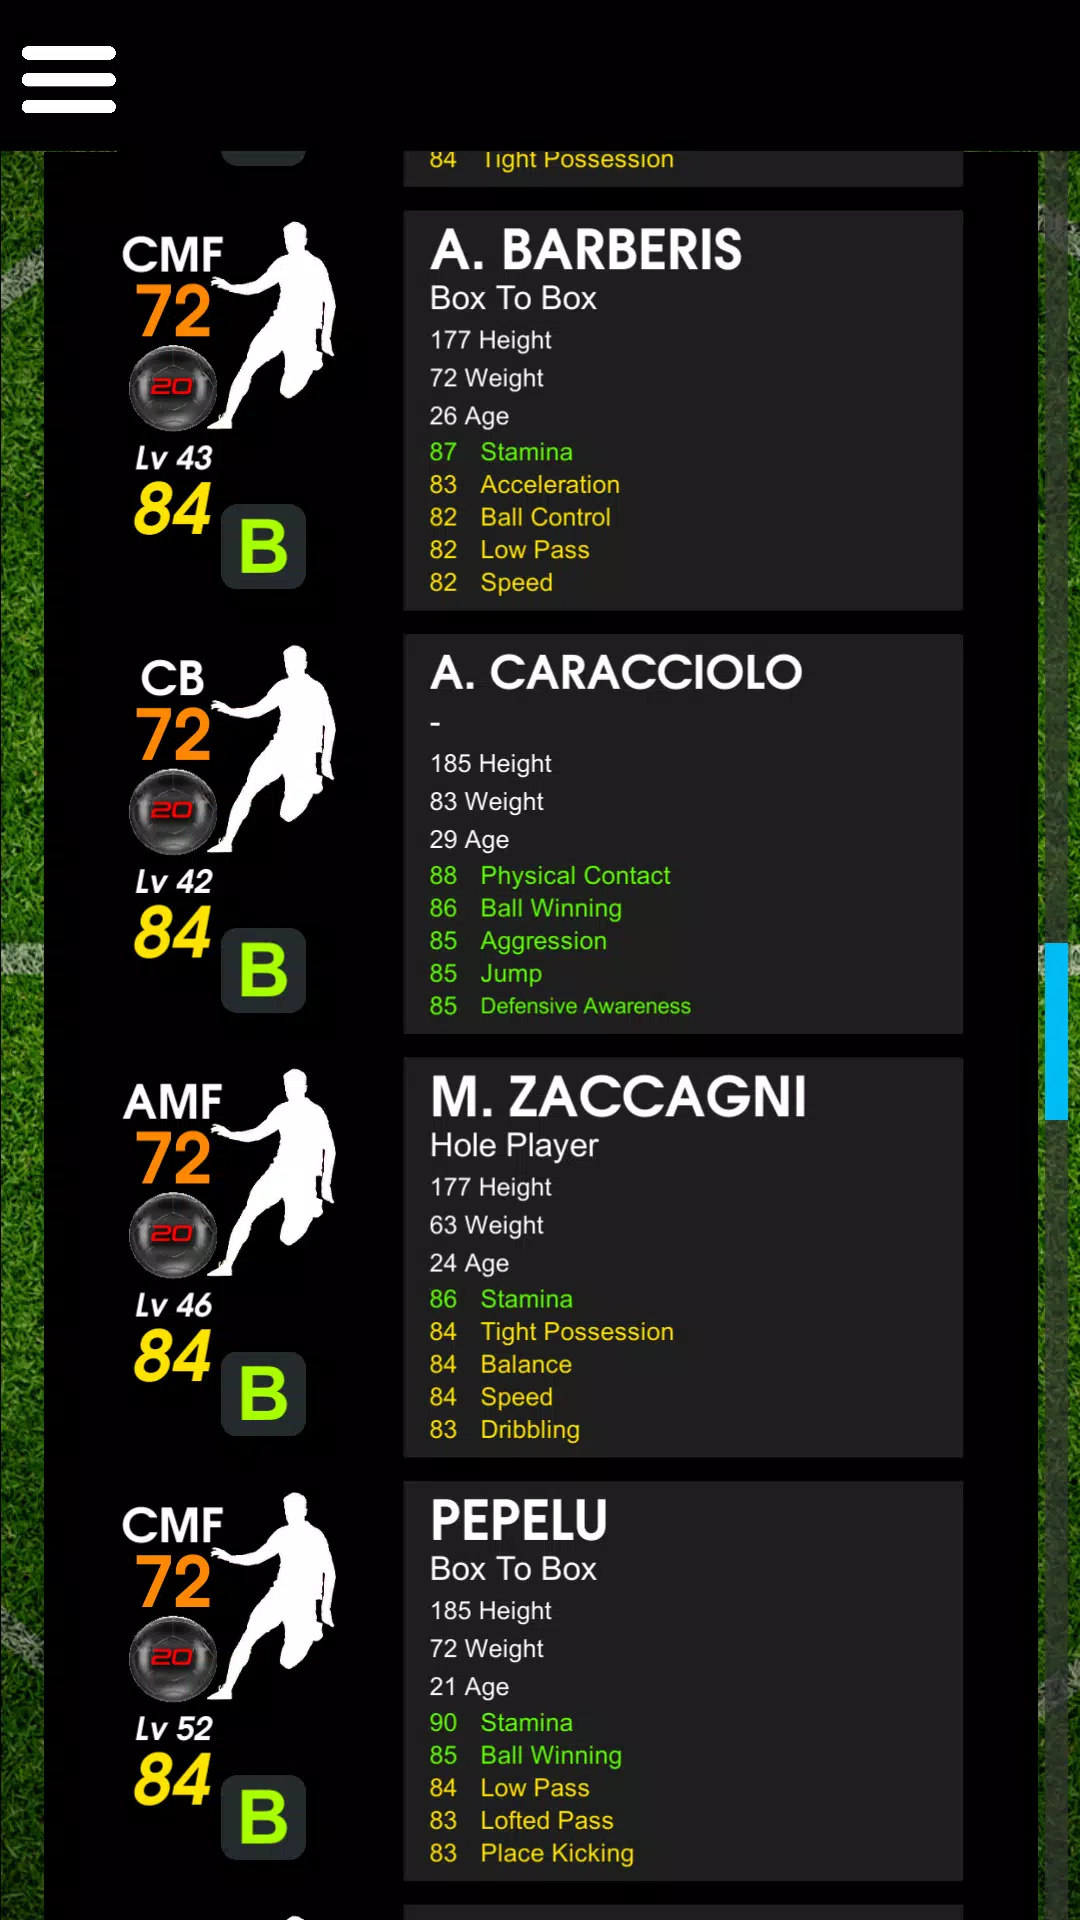 New PESHUB app for PES 21 database. Though Database is empty at this  moment. Link in comment : r/pesmobile